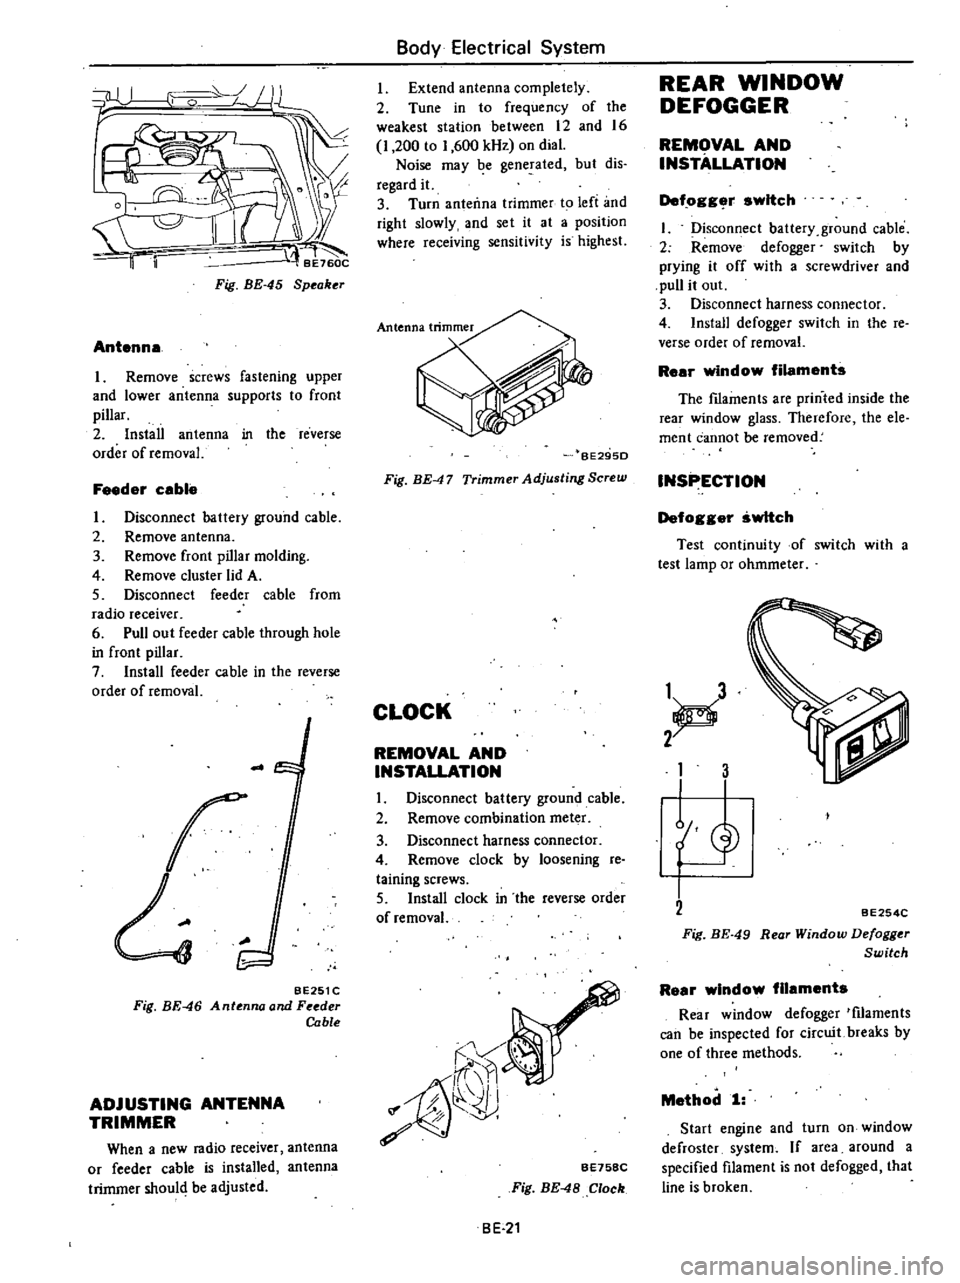 DATSUN 210 1979  Service Manual 
t

Fig 
BE 
45

Speaker

Antenna

Remove 
screws 
fastening

upper

and 
lower 
antenna

supports 
to

front

pillar

2

Install 
antenna 
in

the 
reverse

order 
of 
removal

Feeder 
cable

I

Disc